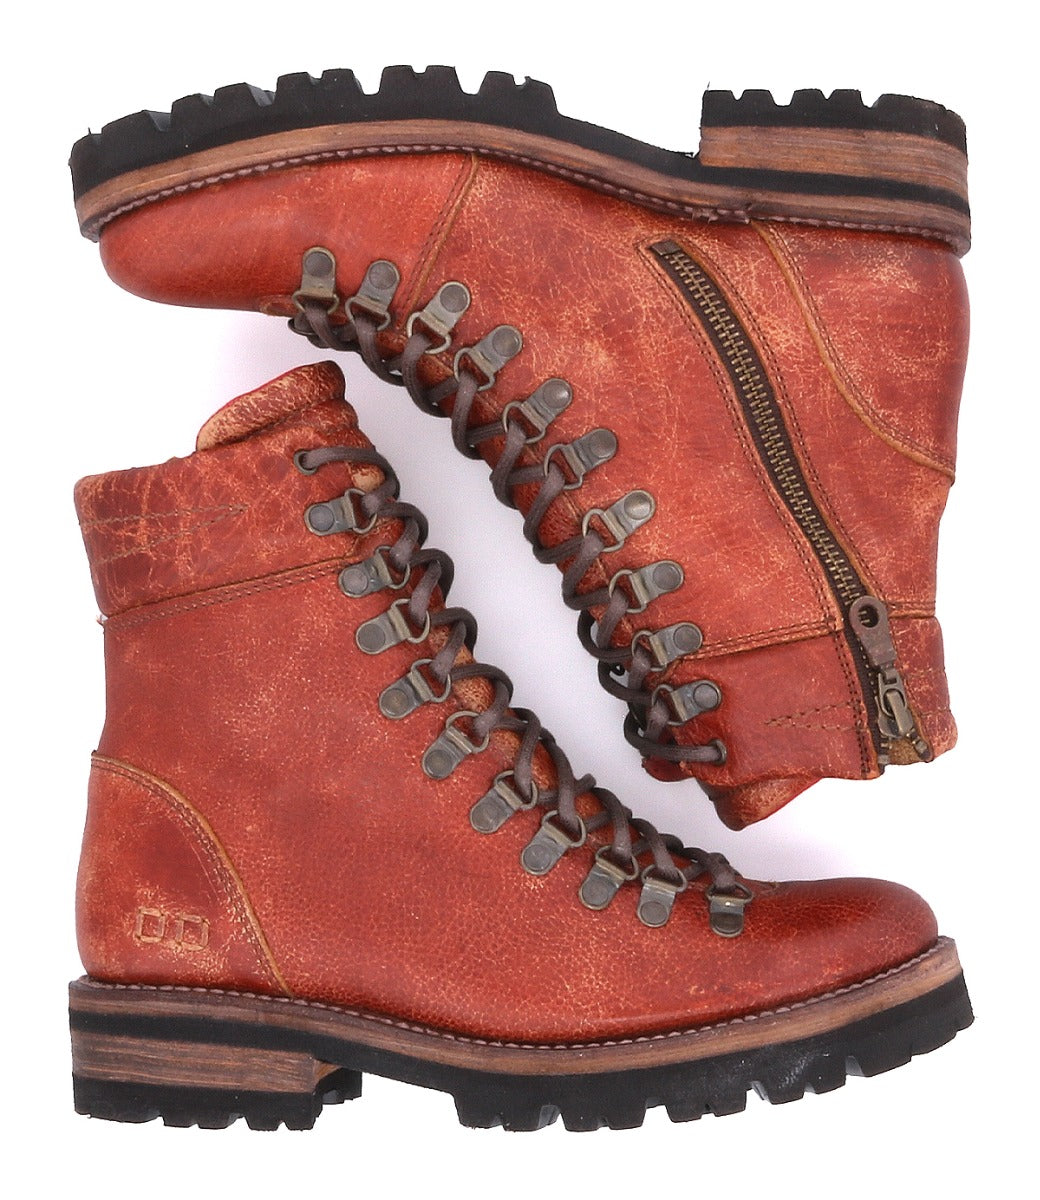 A pair of Khya boots by Bed Stu, made of red leather with brown laces.